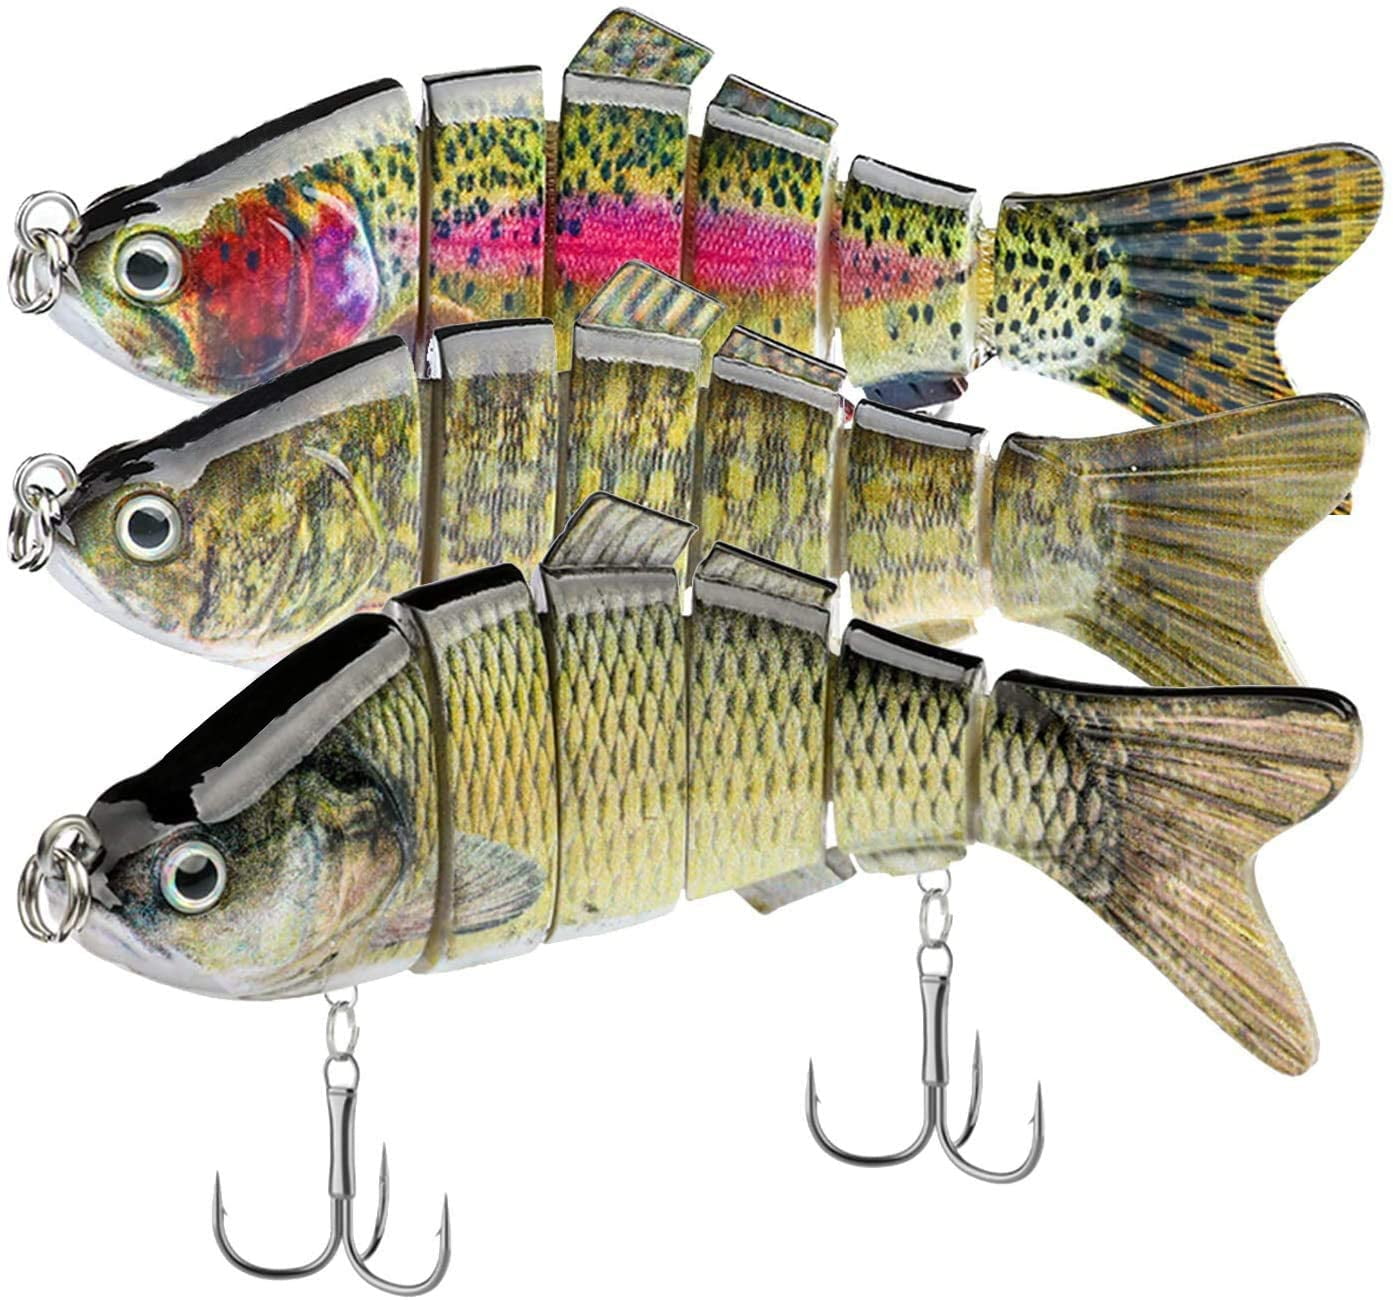 Fishing Lures for Bass 3.9 inch 7 Segment Multi Jointed Swimbaits Bass Slow Sink 